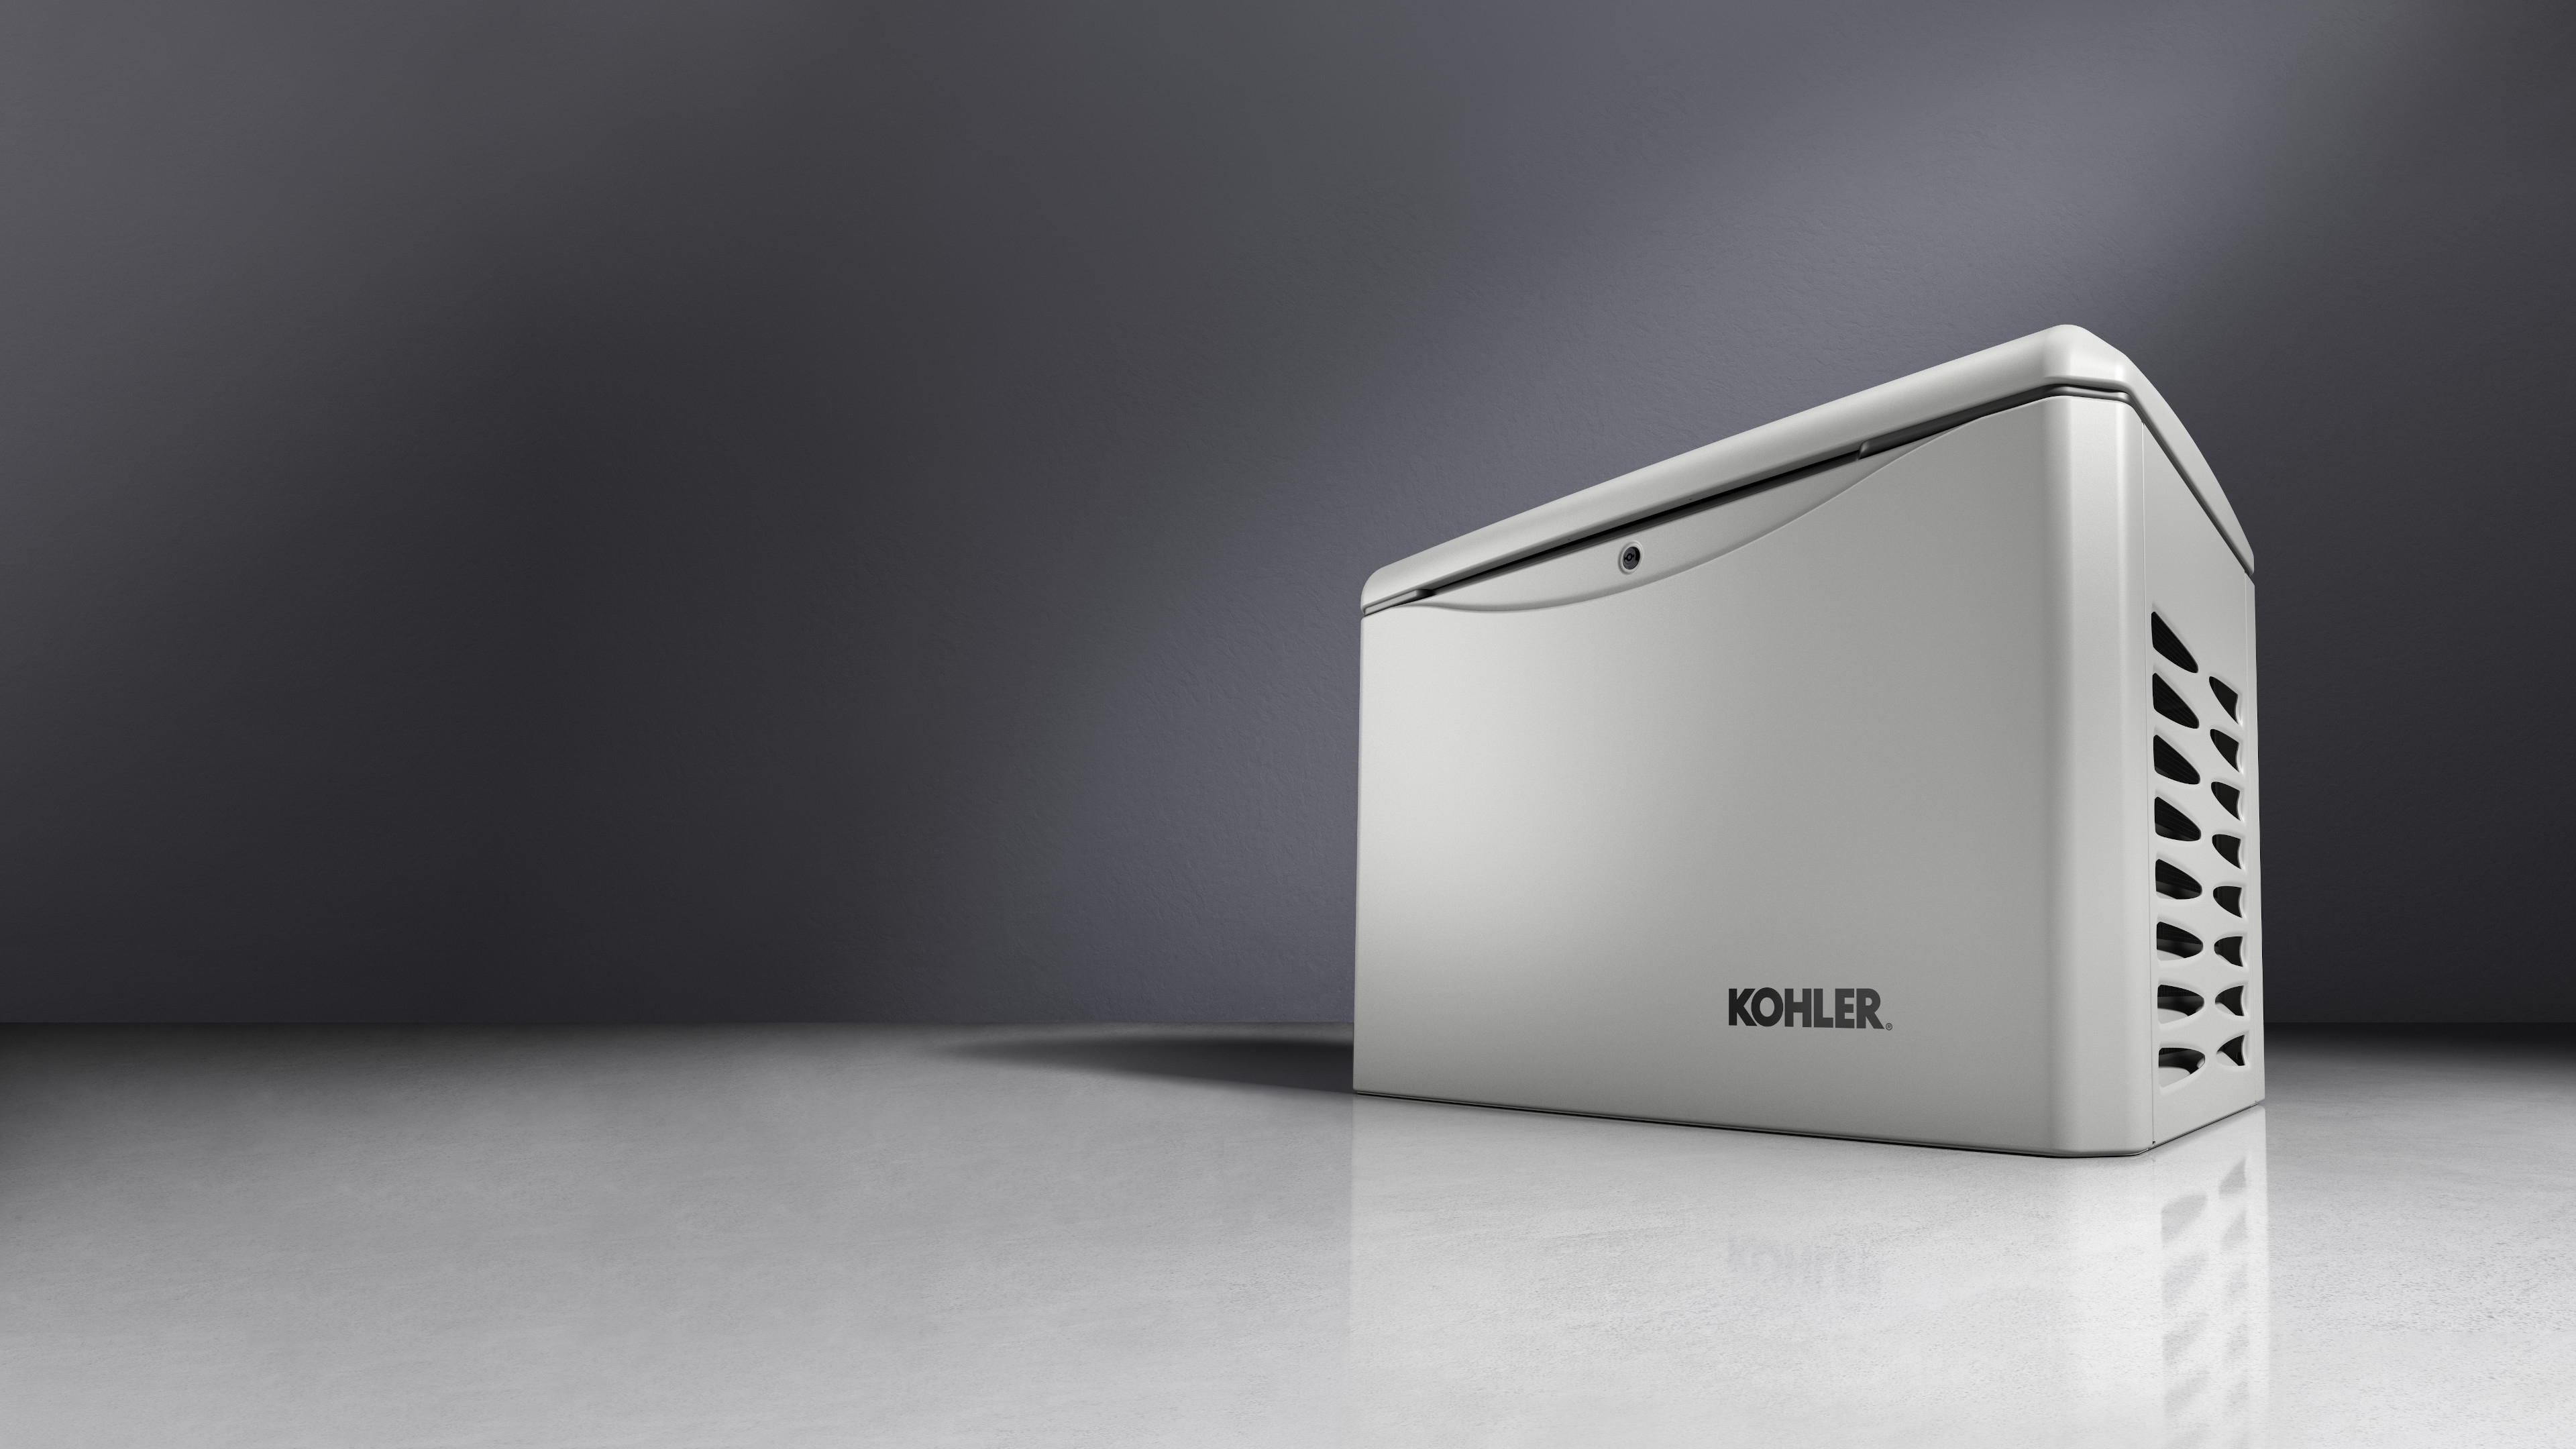 Pigeon Feather color Kohler residential generator with ventilated side panels, showcased against a gradient gray background.